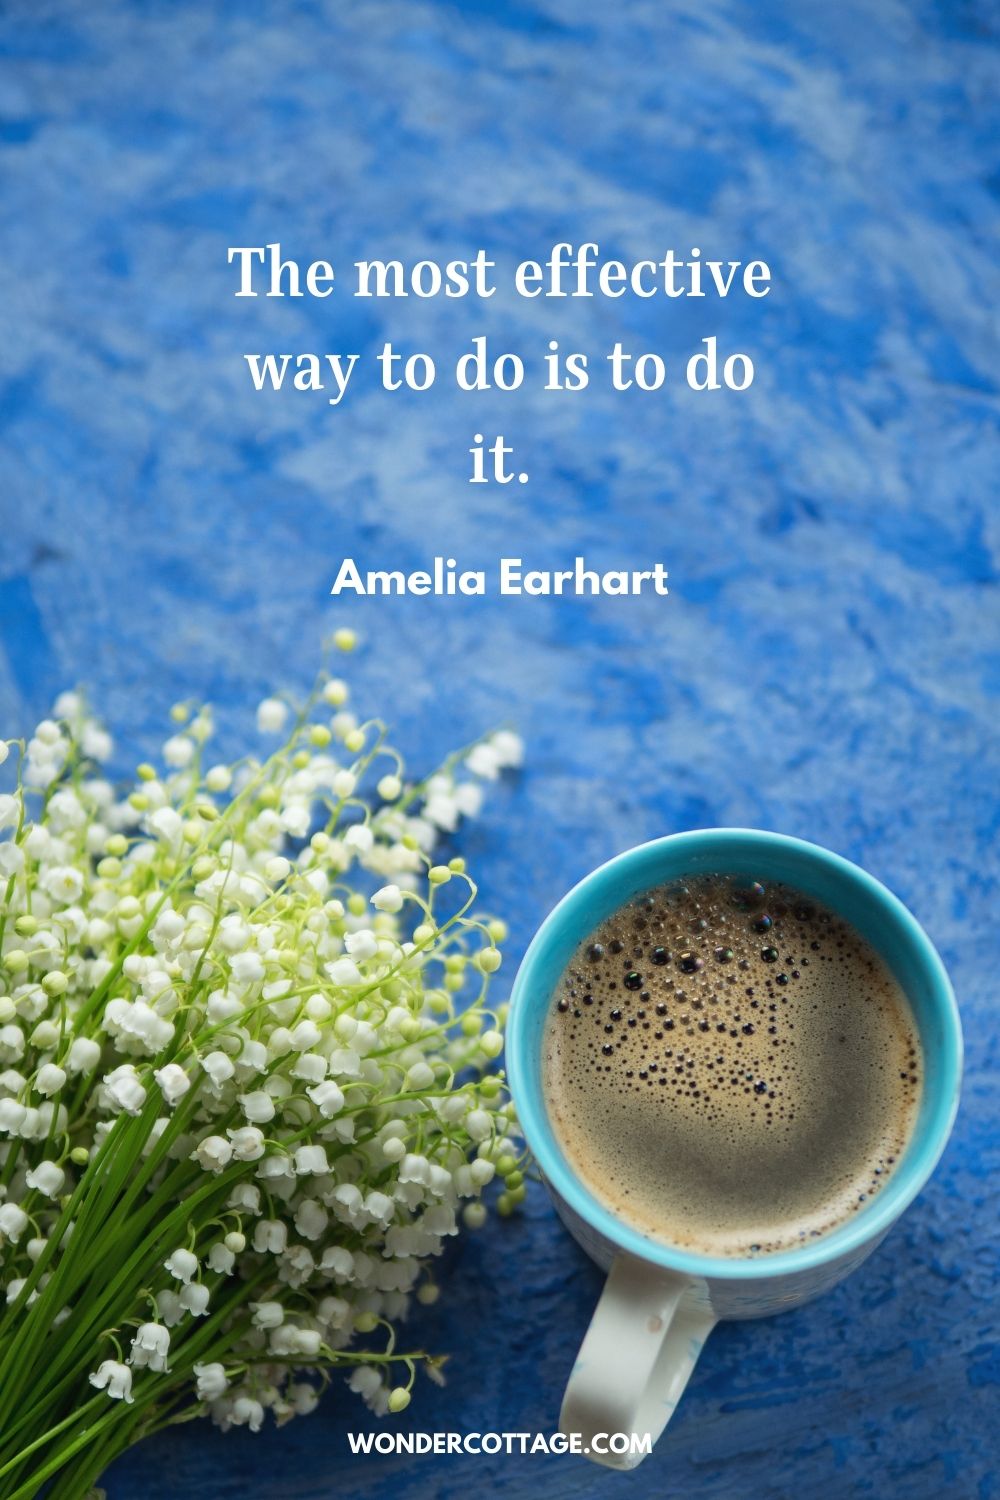 The most effective way to do is to do it." Amelia Earhart